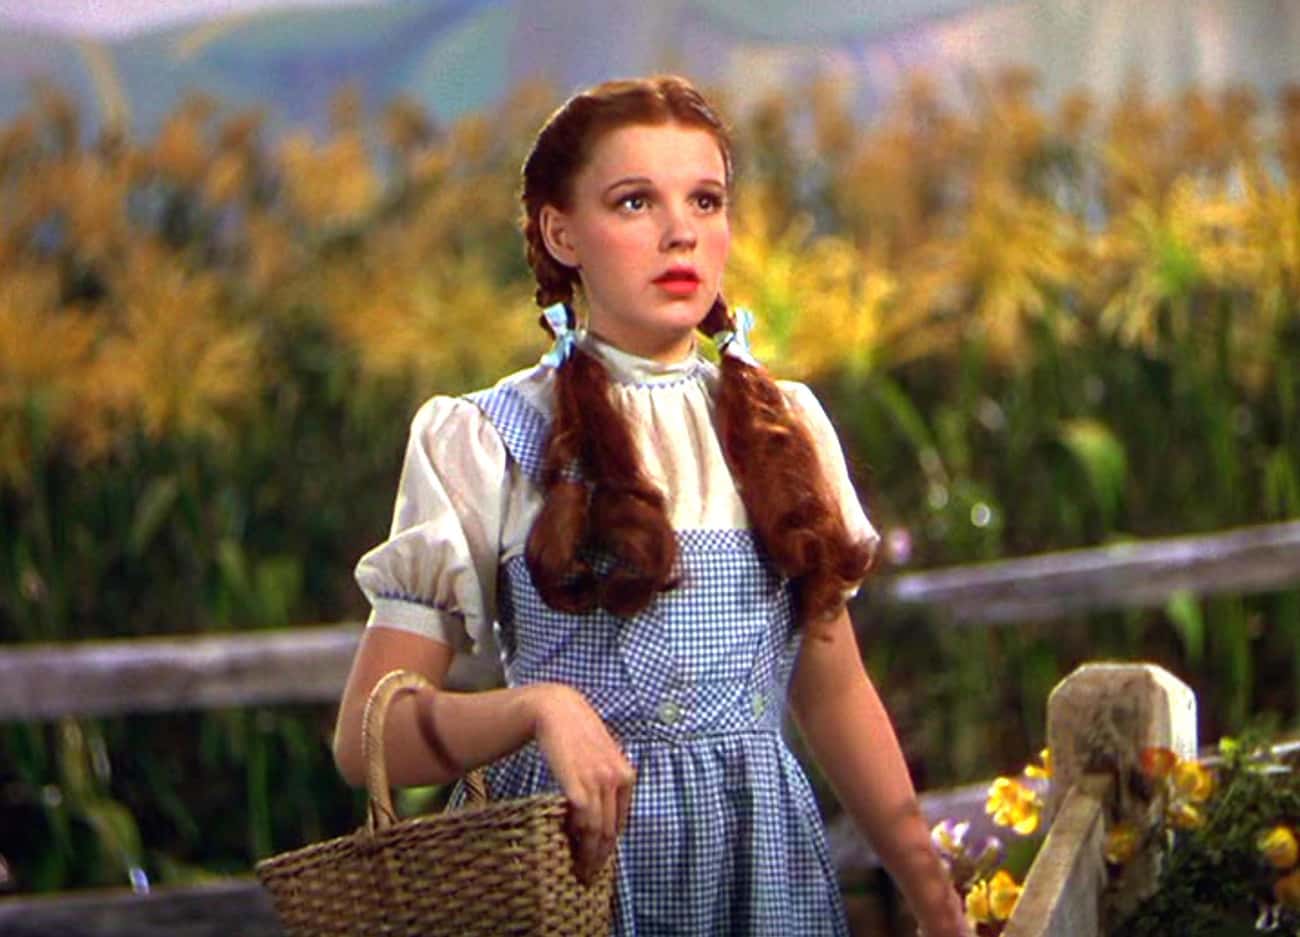 Judy Garland Was Forced To Develop An Eating Disorder To Maintain Her Weight